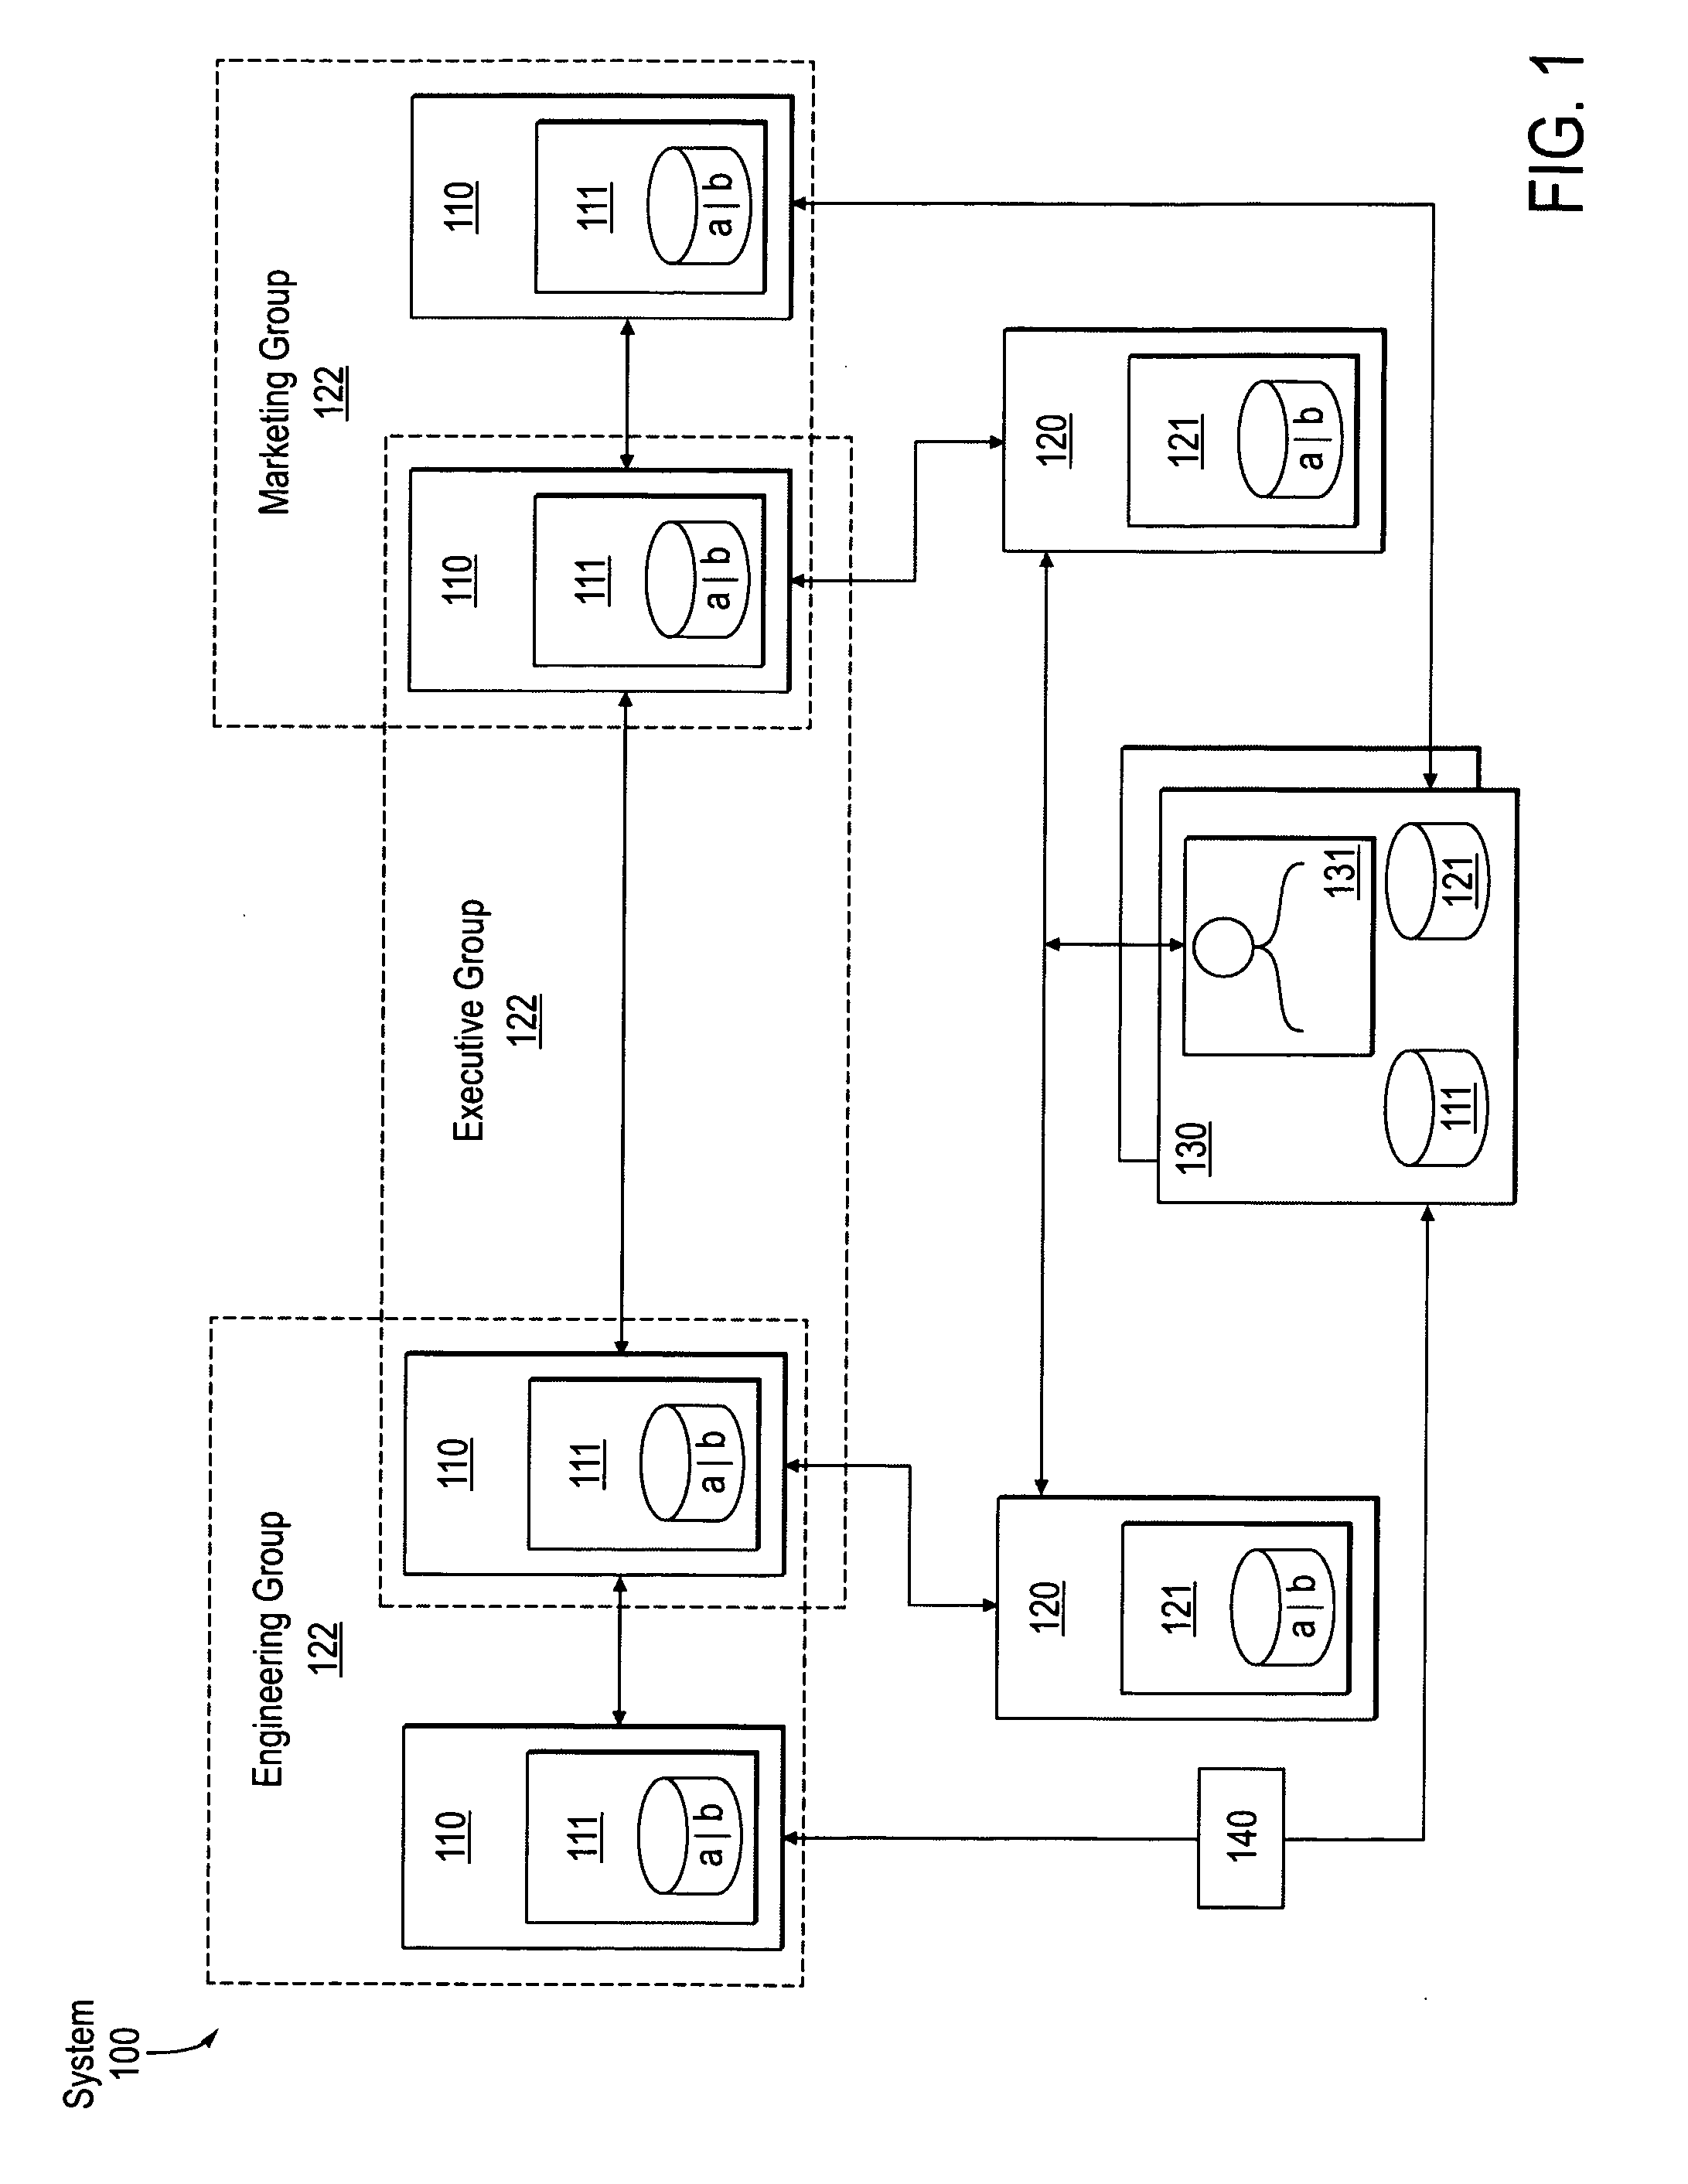 Managing configuration information for multiple devices